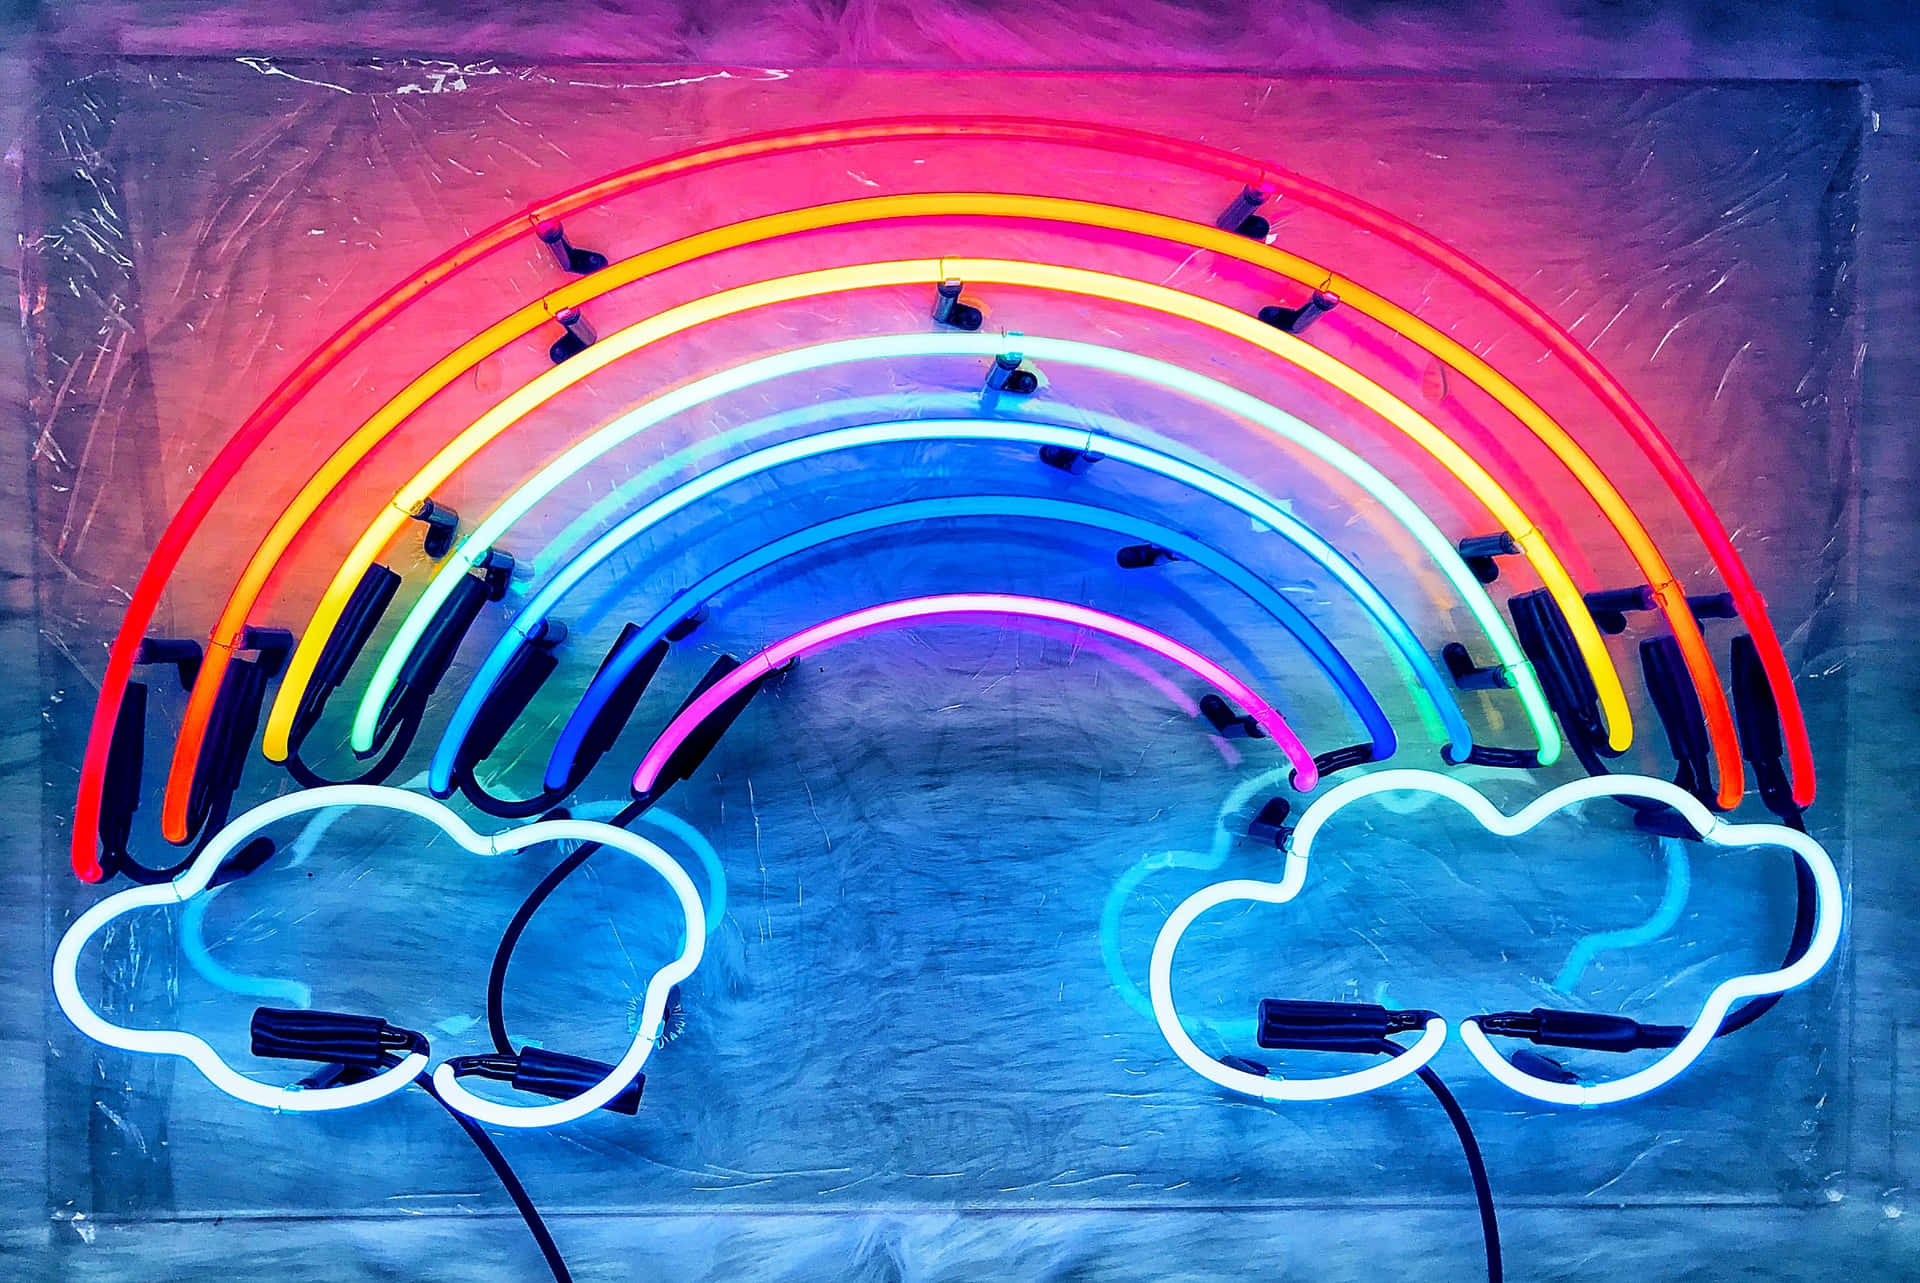 Neon Rainbow Pictures  Download Free Images on Unsplash